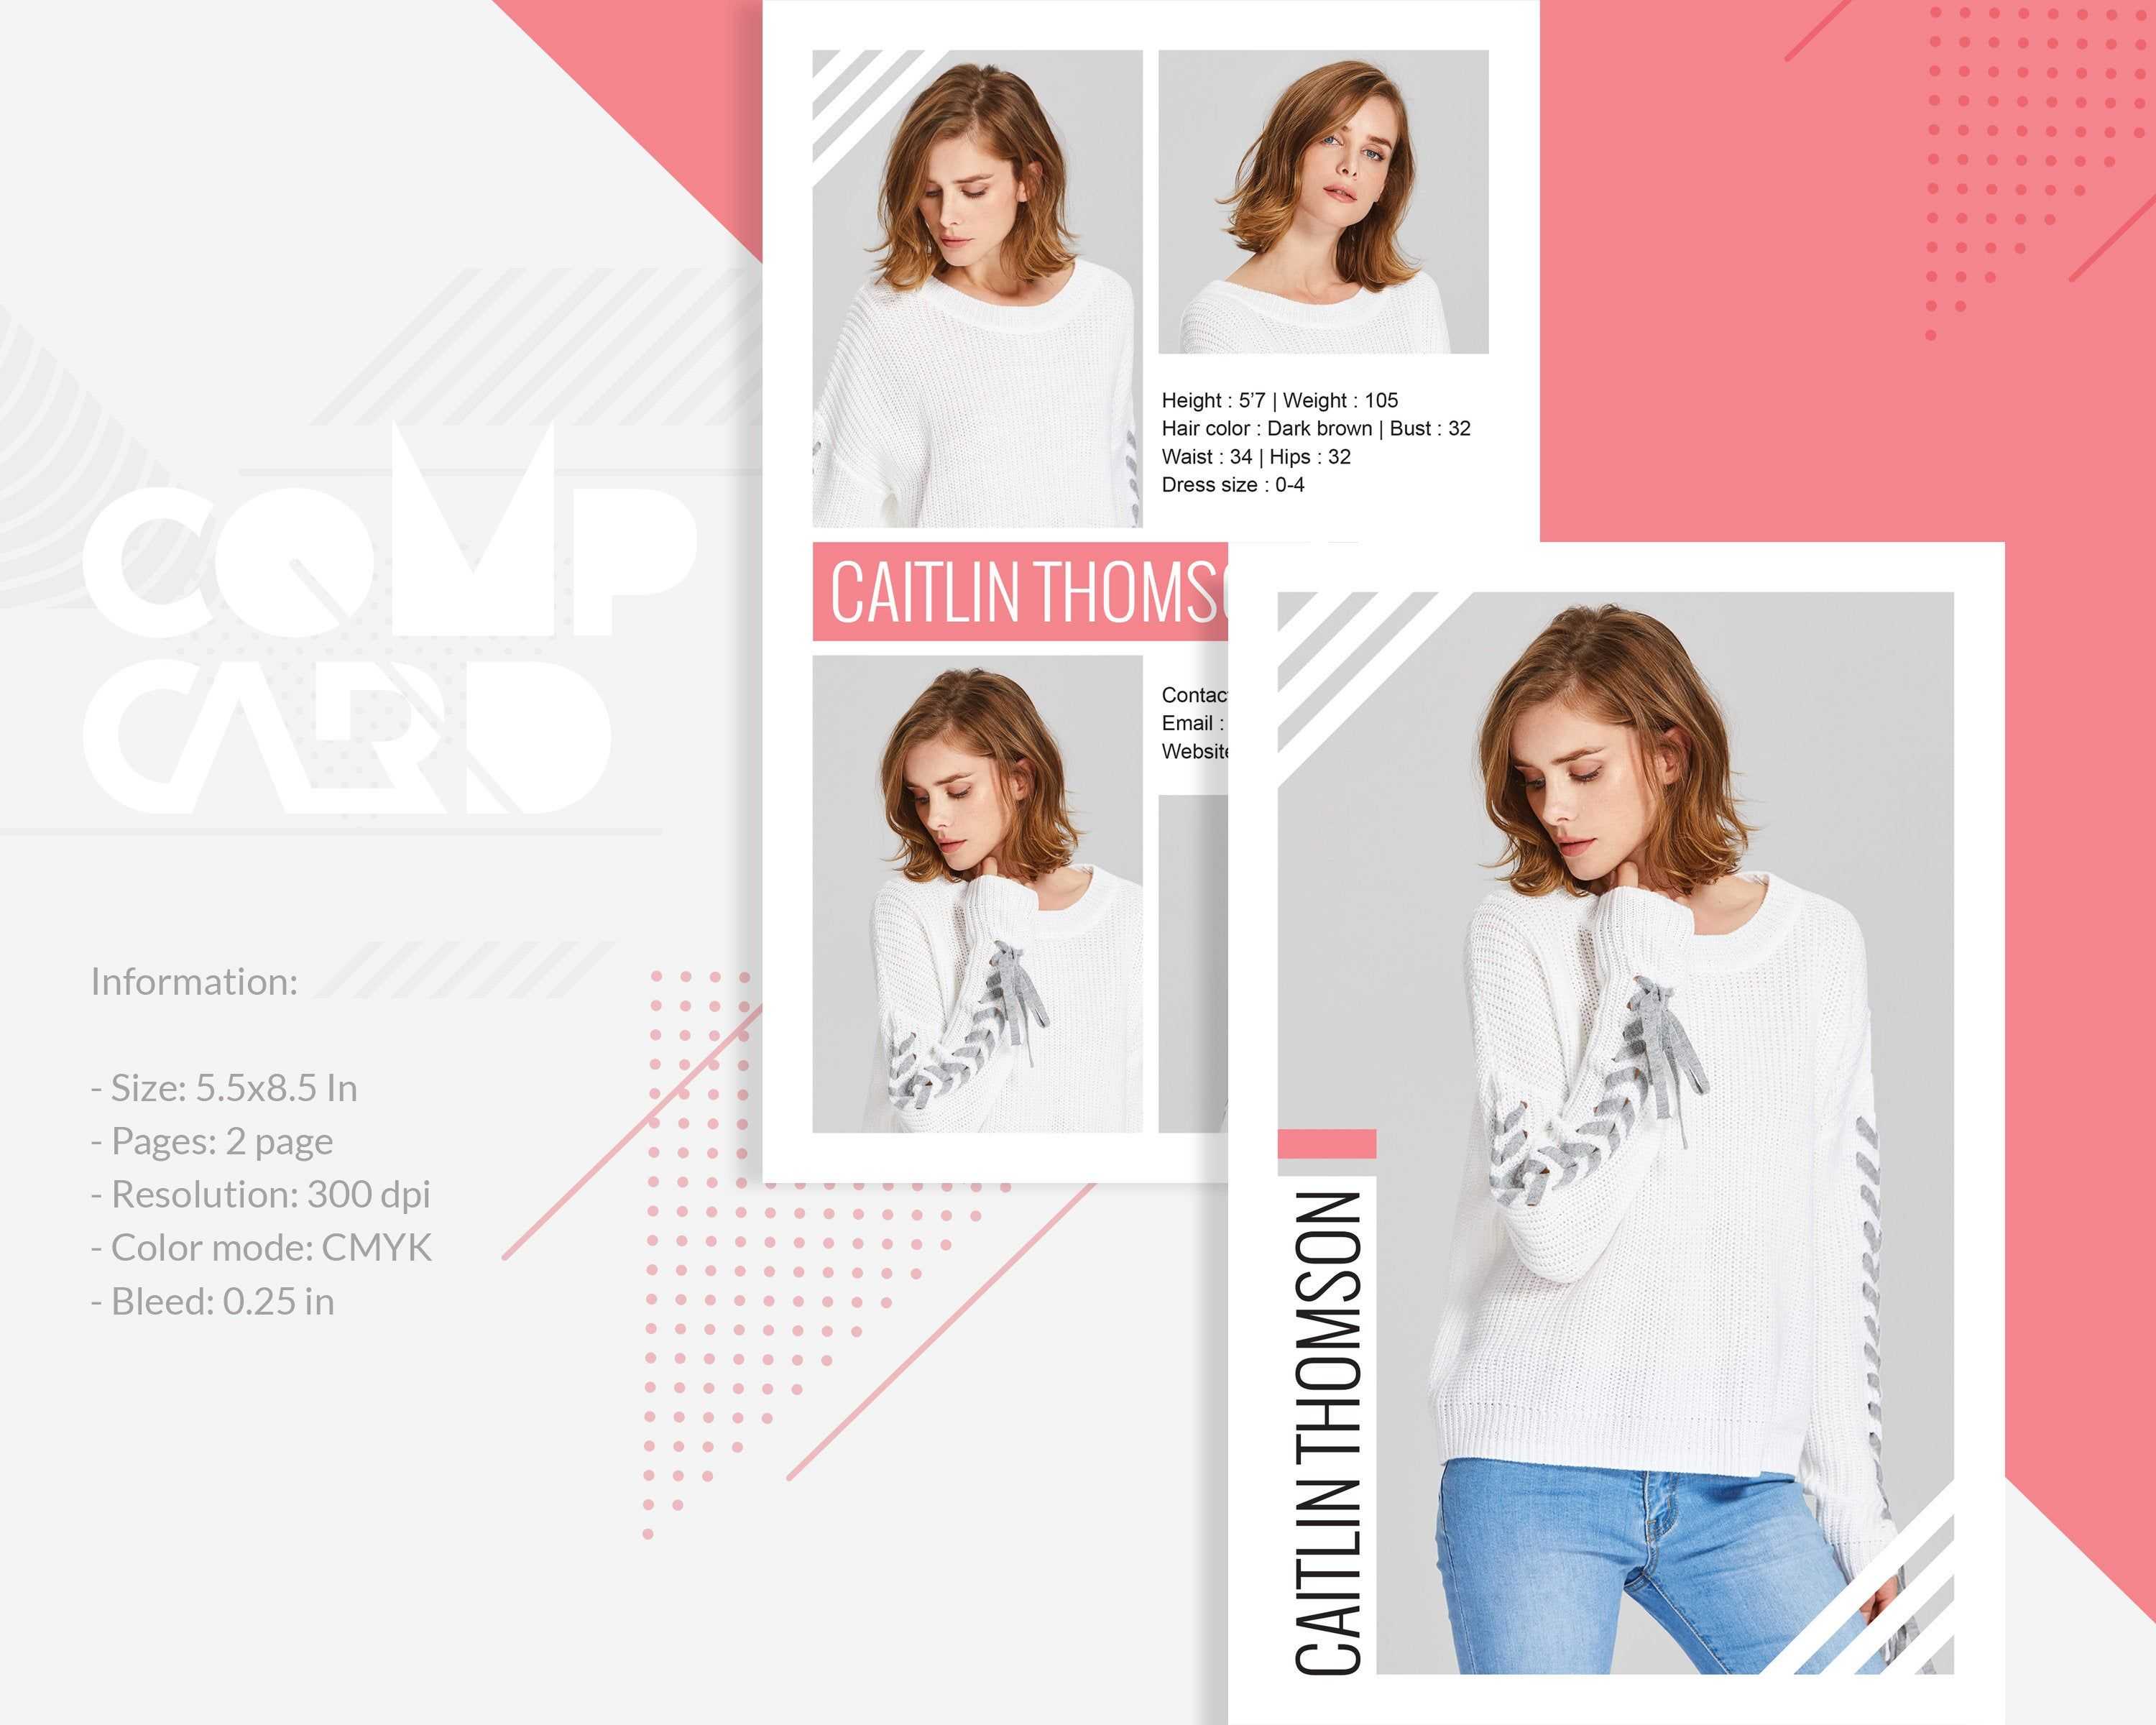 Modeling Comp Card | Fashion Model Comp Card Template Intended For Comp Card Template Psd